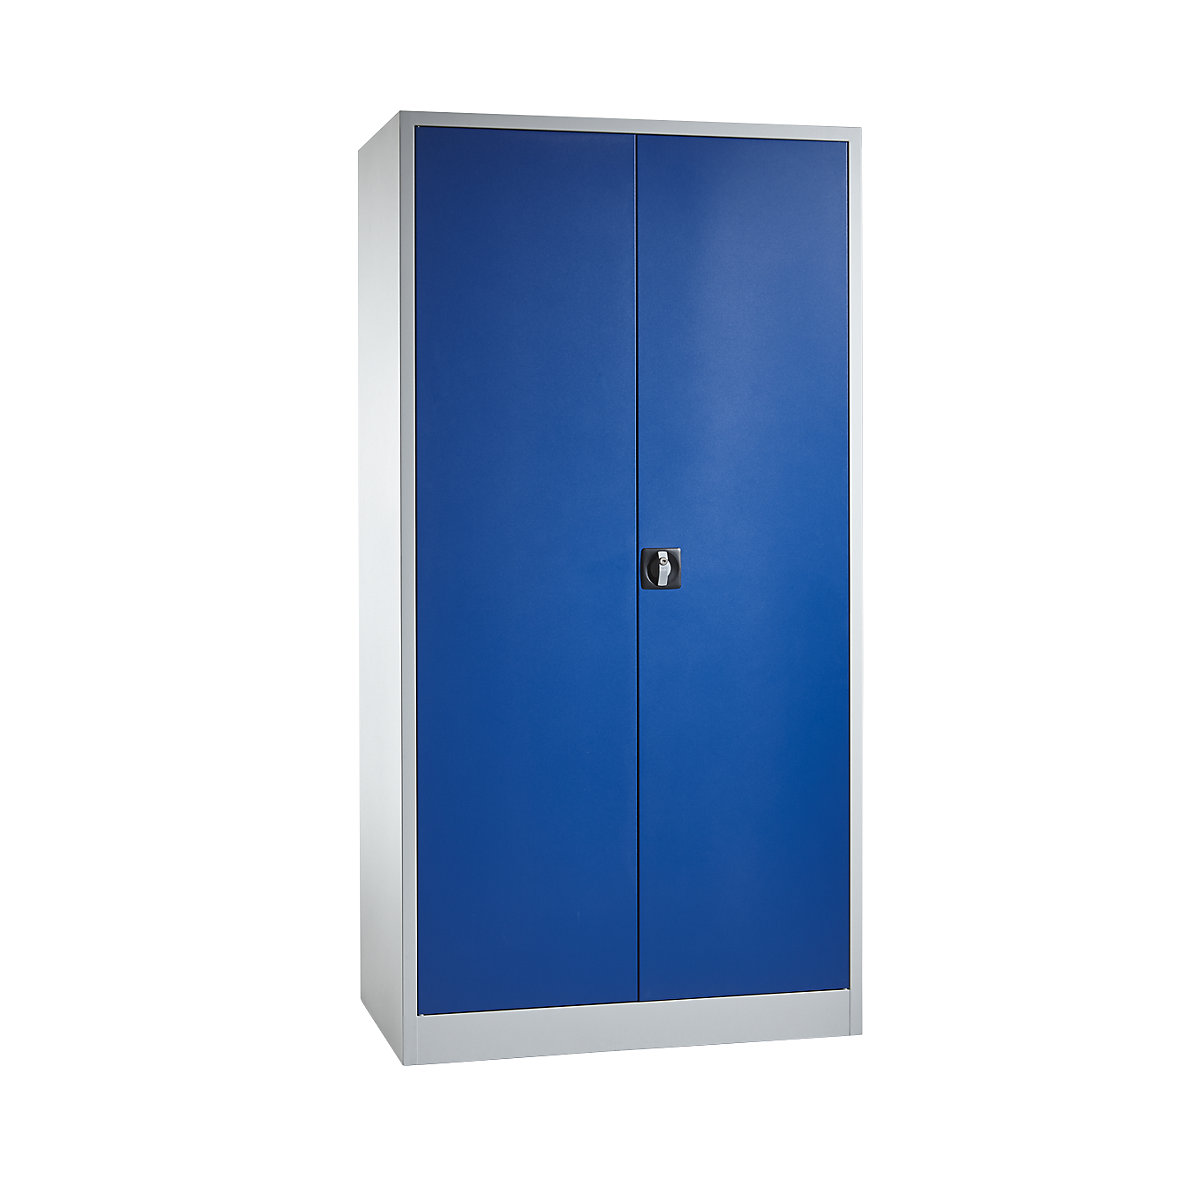 Vertical pull-out cupboard – eurokraft pro, without partition, 4 drawers, light grey / gentian blue-13